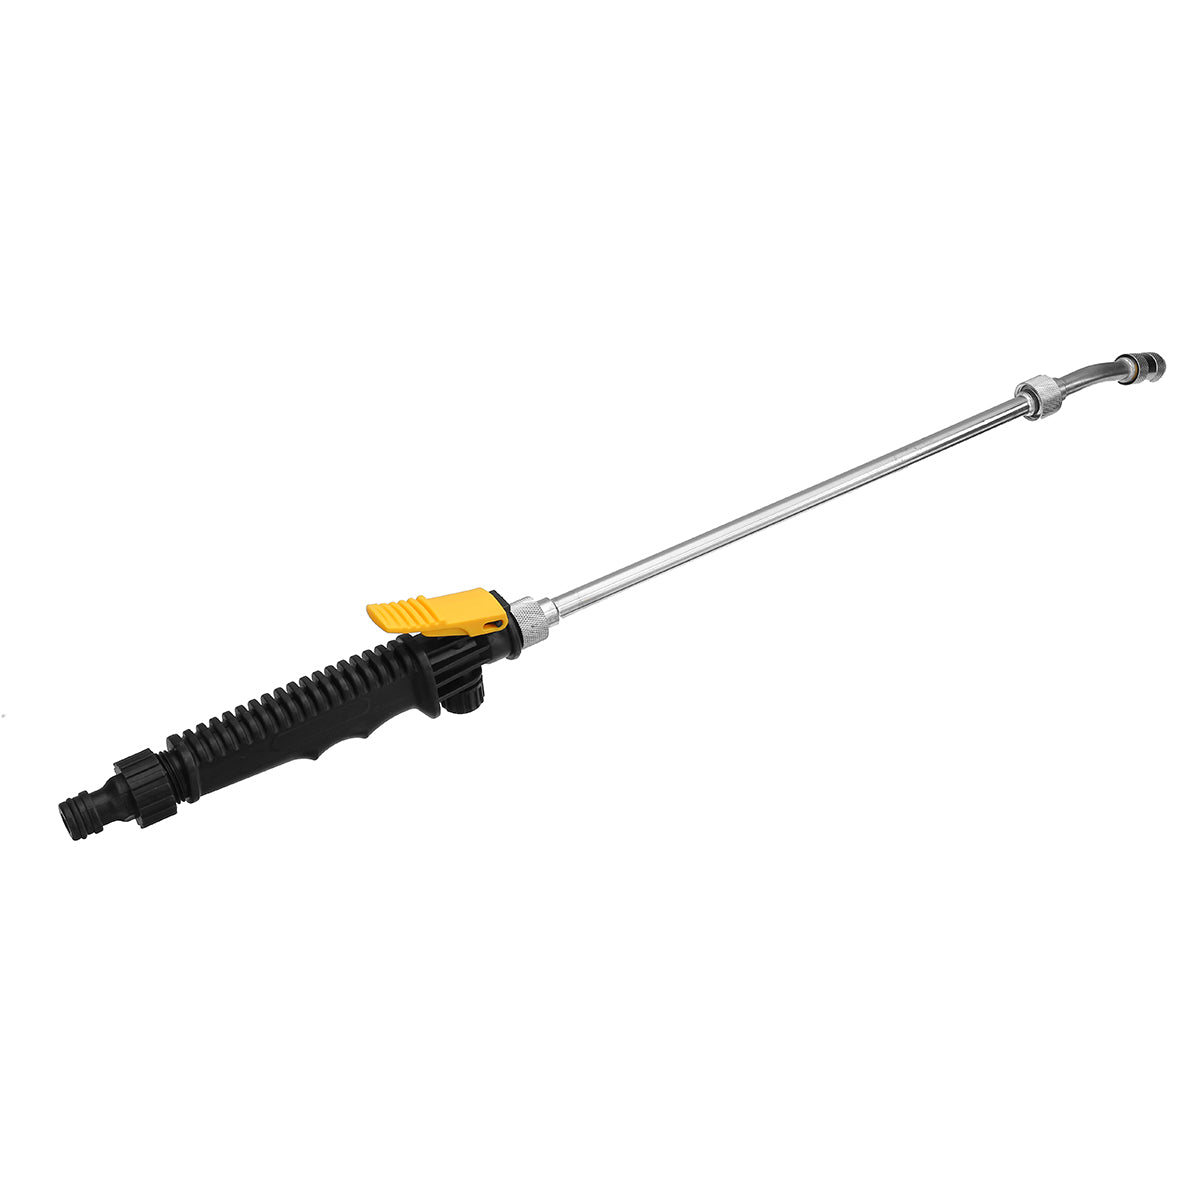 Goldenrod 2-IN-1 56CM High Pressure Power Water Washer Wand Nozzle Spray Tool Flow Controls